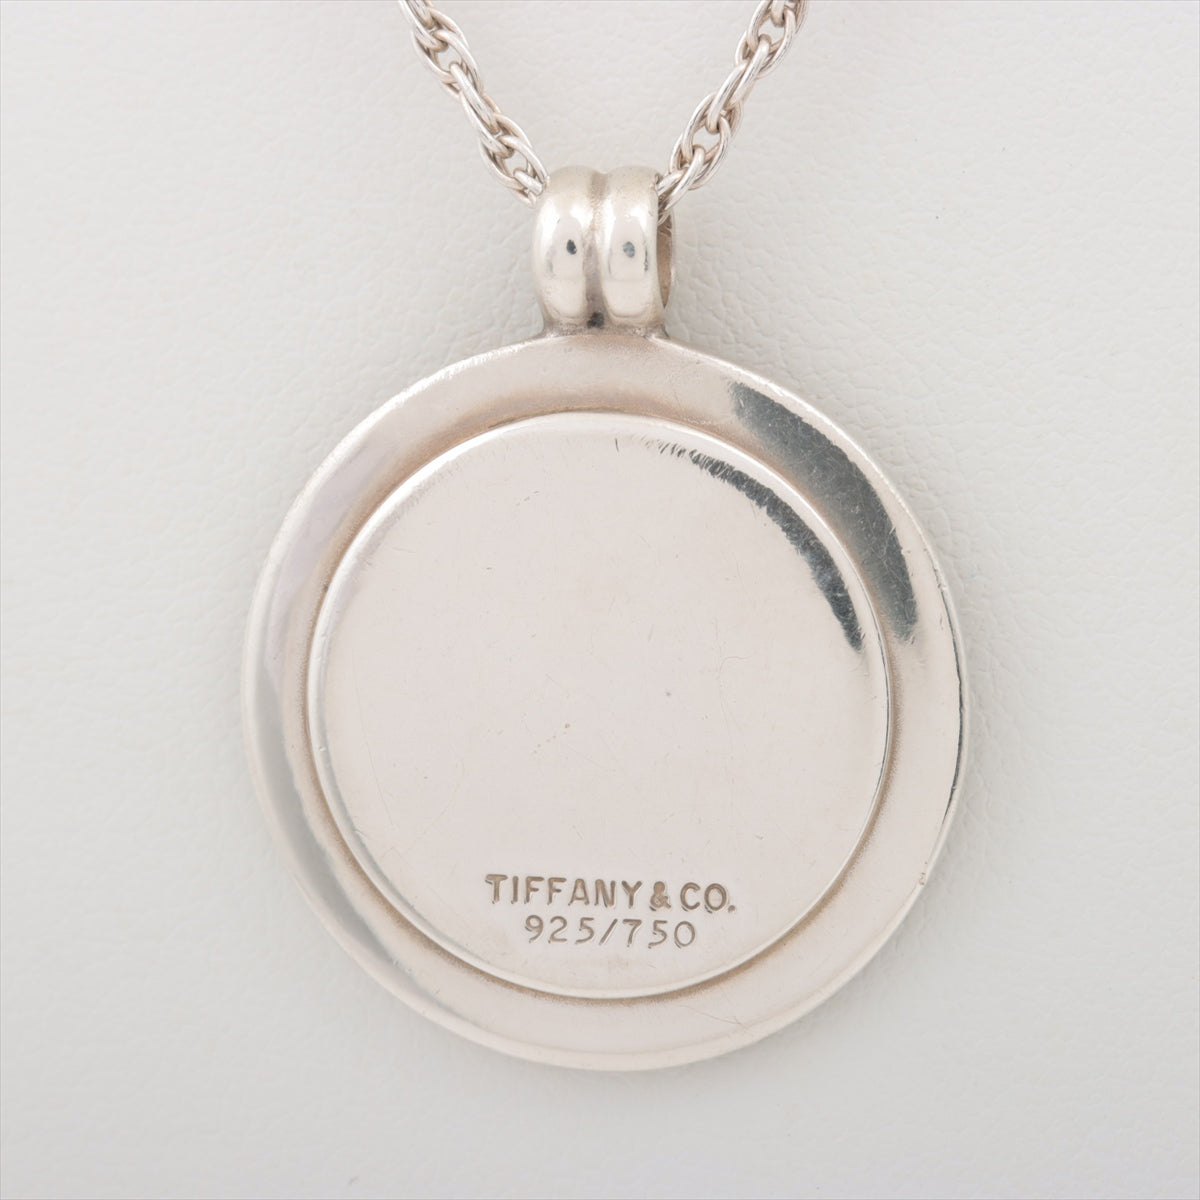 Tiffany Saint Christopher Necklace 925×750 14.2g Silver x gold Coin